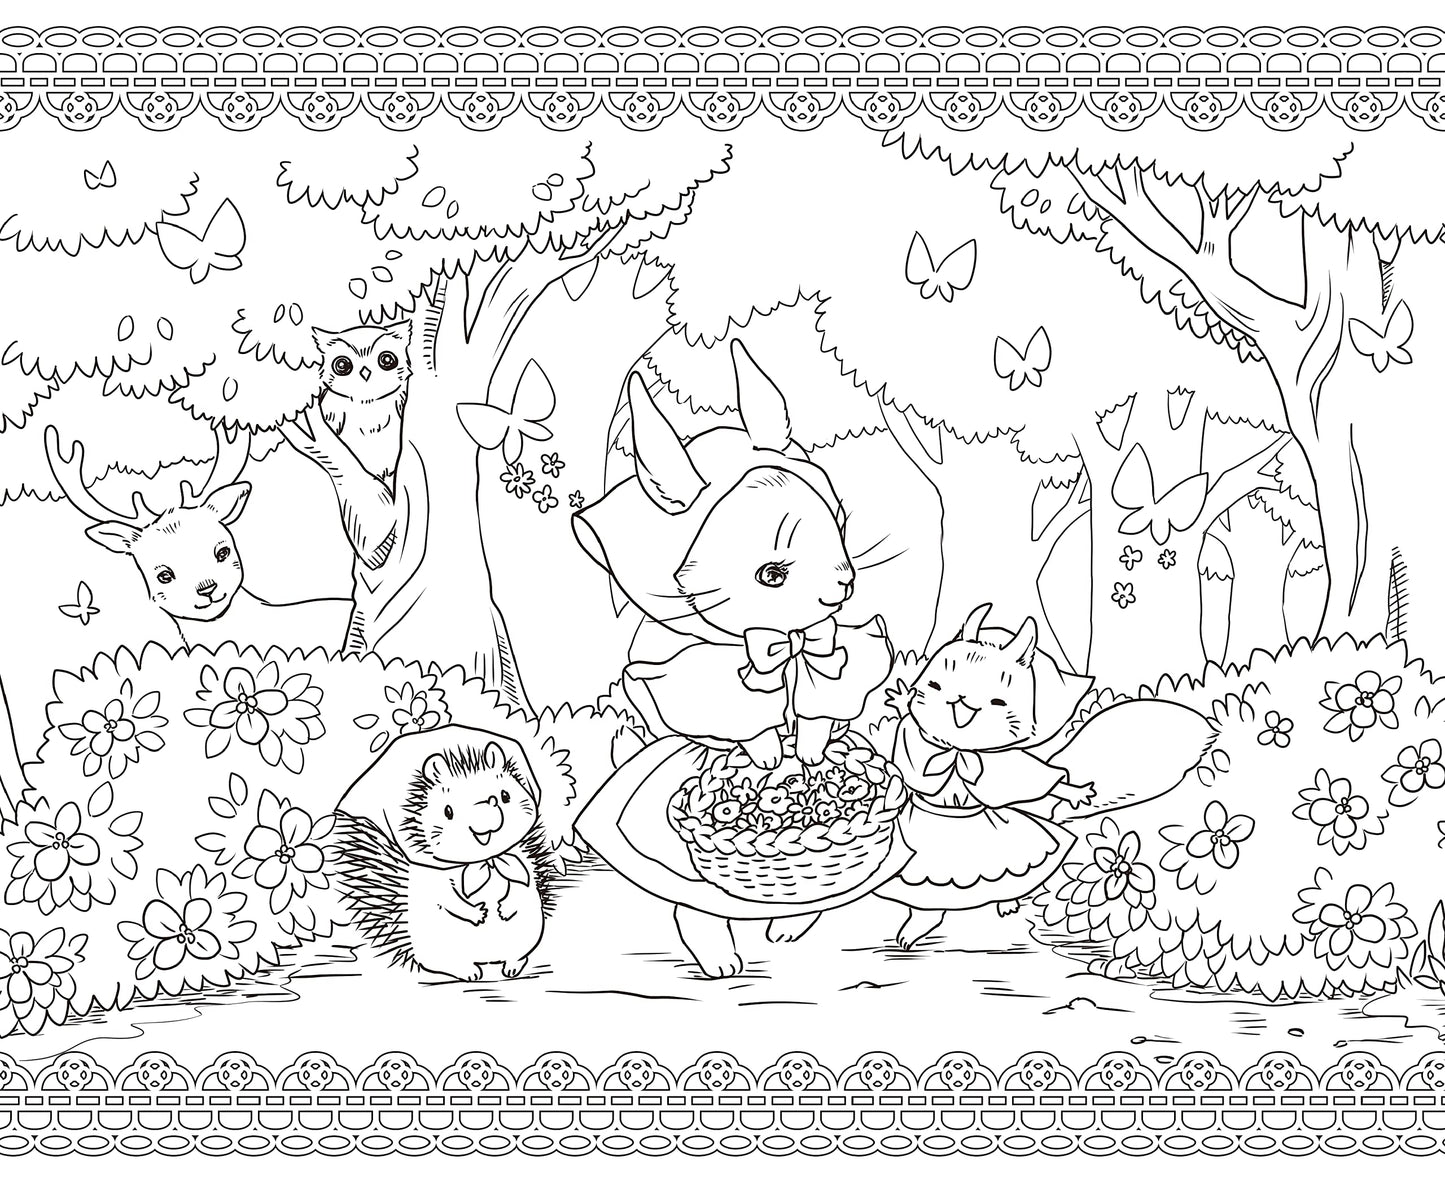 [COLORING] A trip around fairy tales with small friends in the forest Coloring Book(Japanese) by Sayuri Kobayashi - May 2023